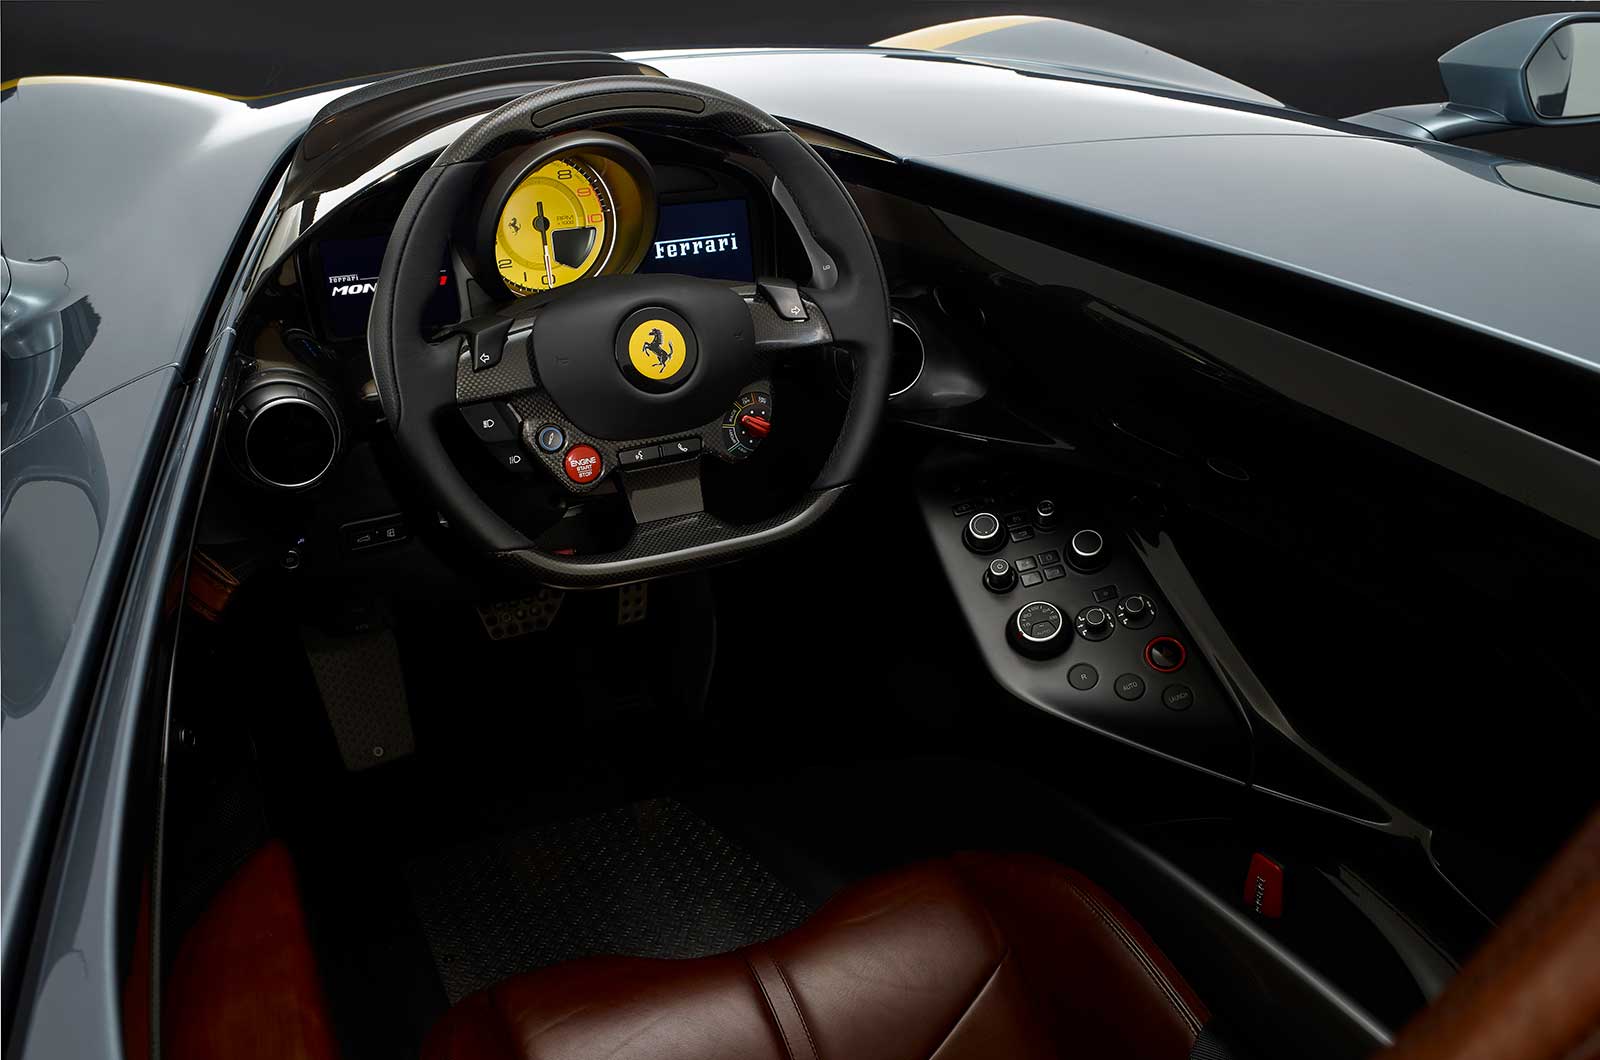 Classic & Sports Car – Ferrari’s new Monza SP1 and SP2 hark back to the ’50s in style